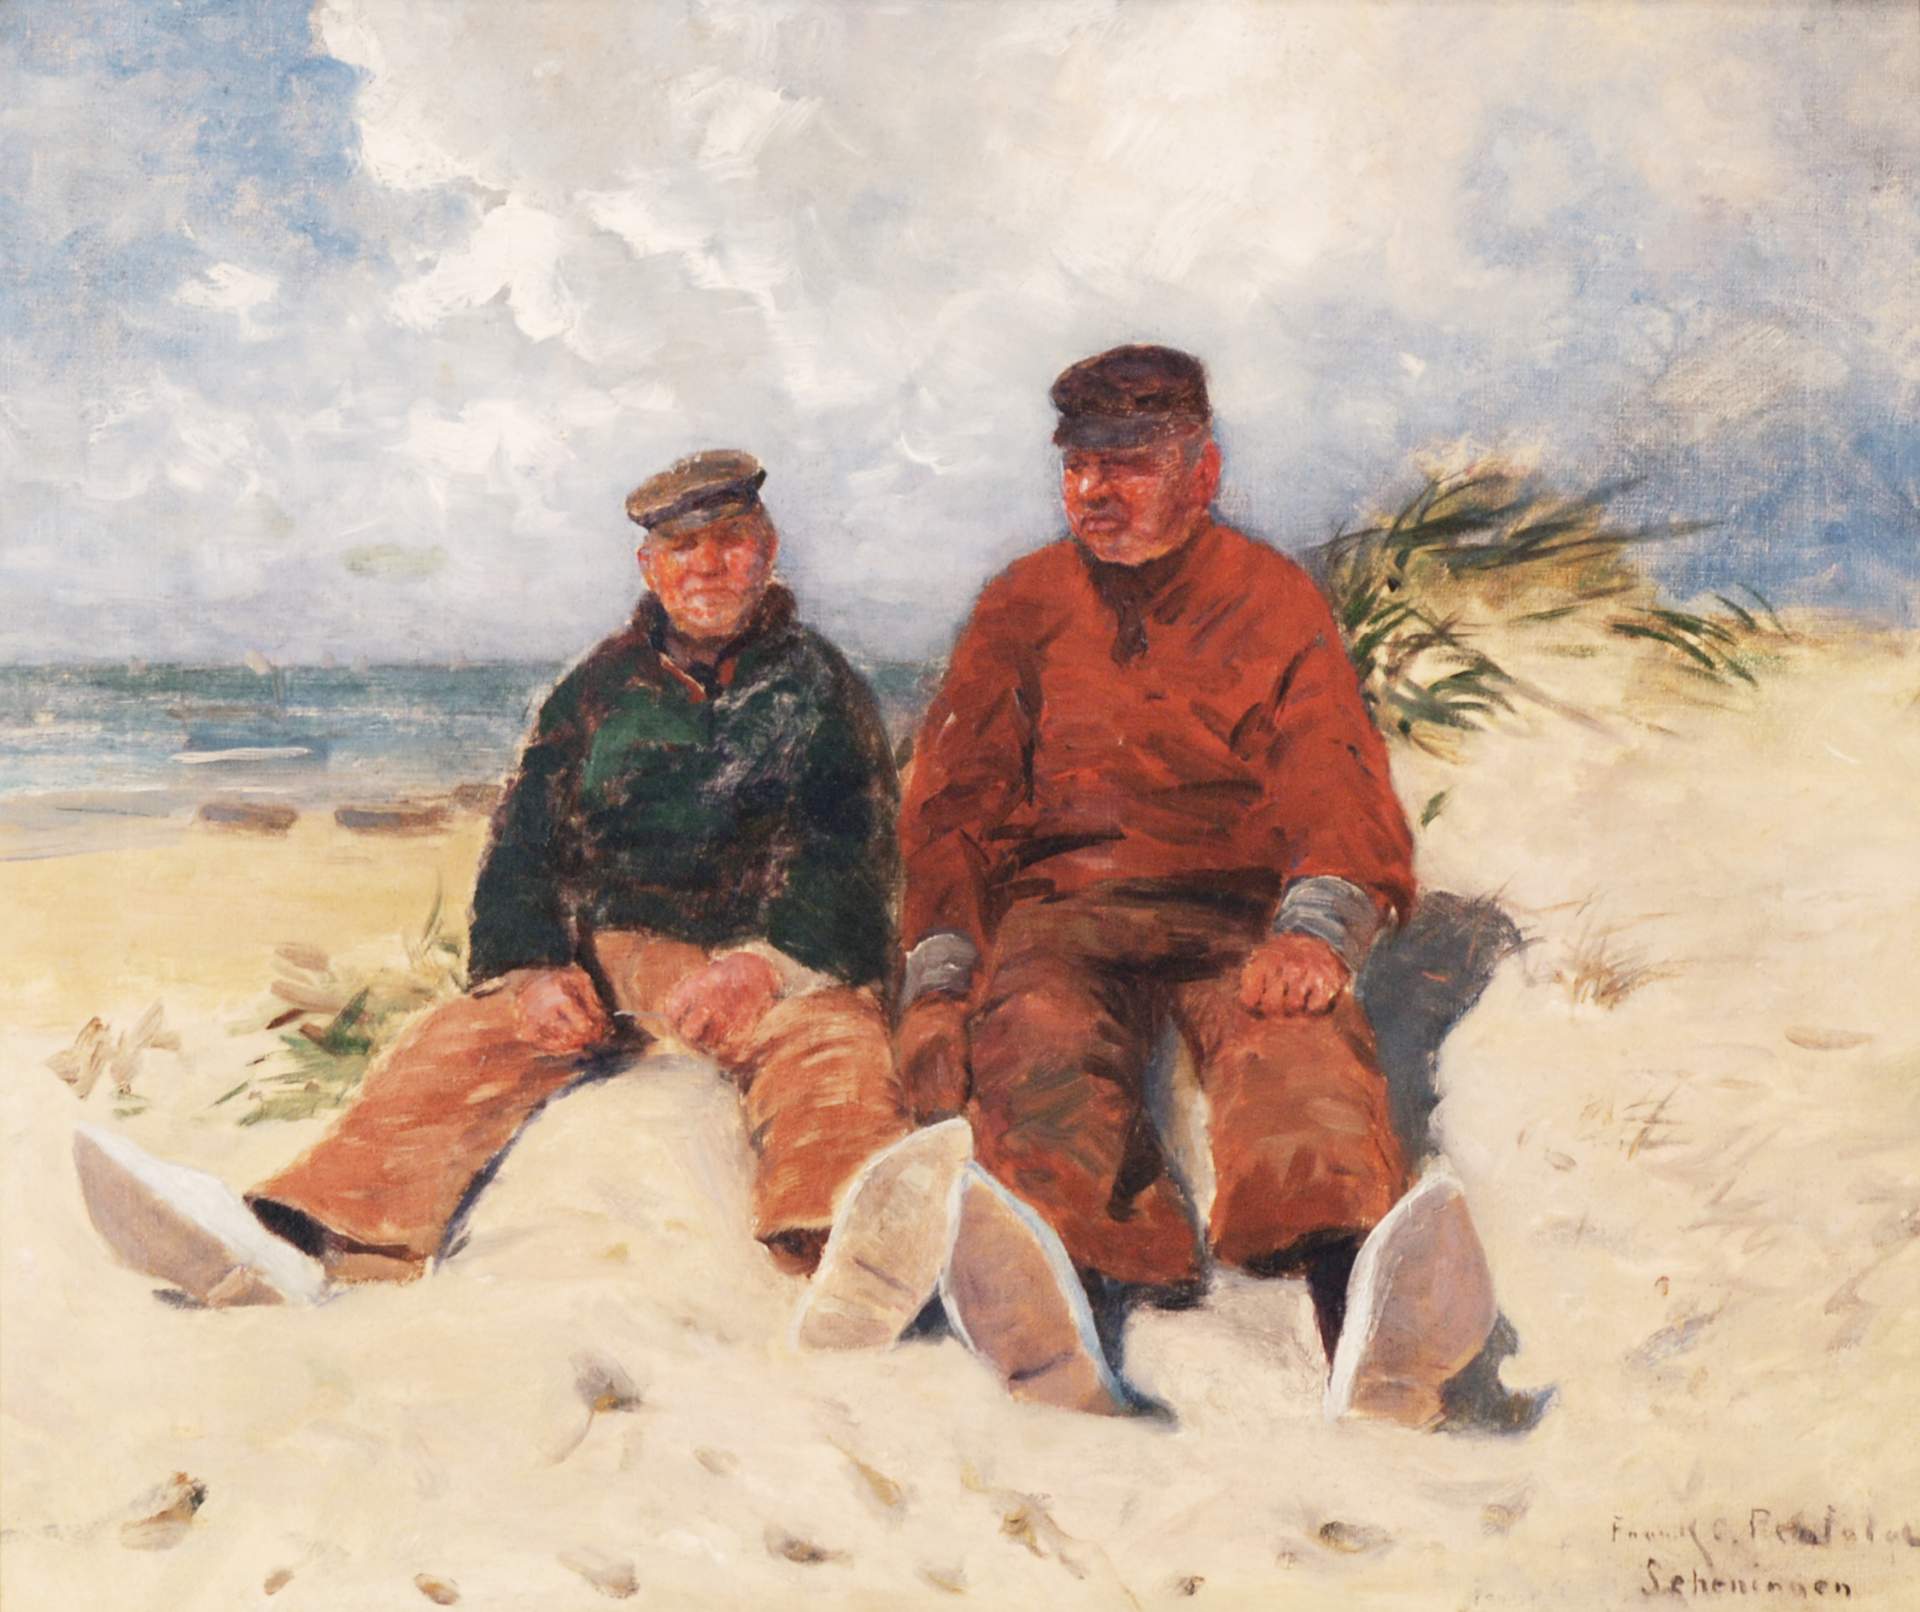 Untitled [Two Briton men on the beach]